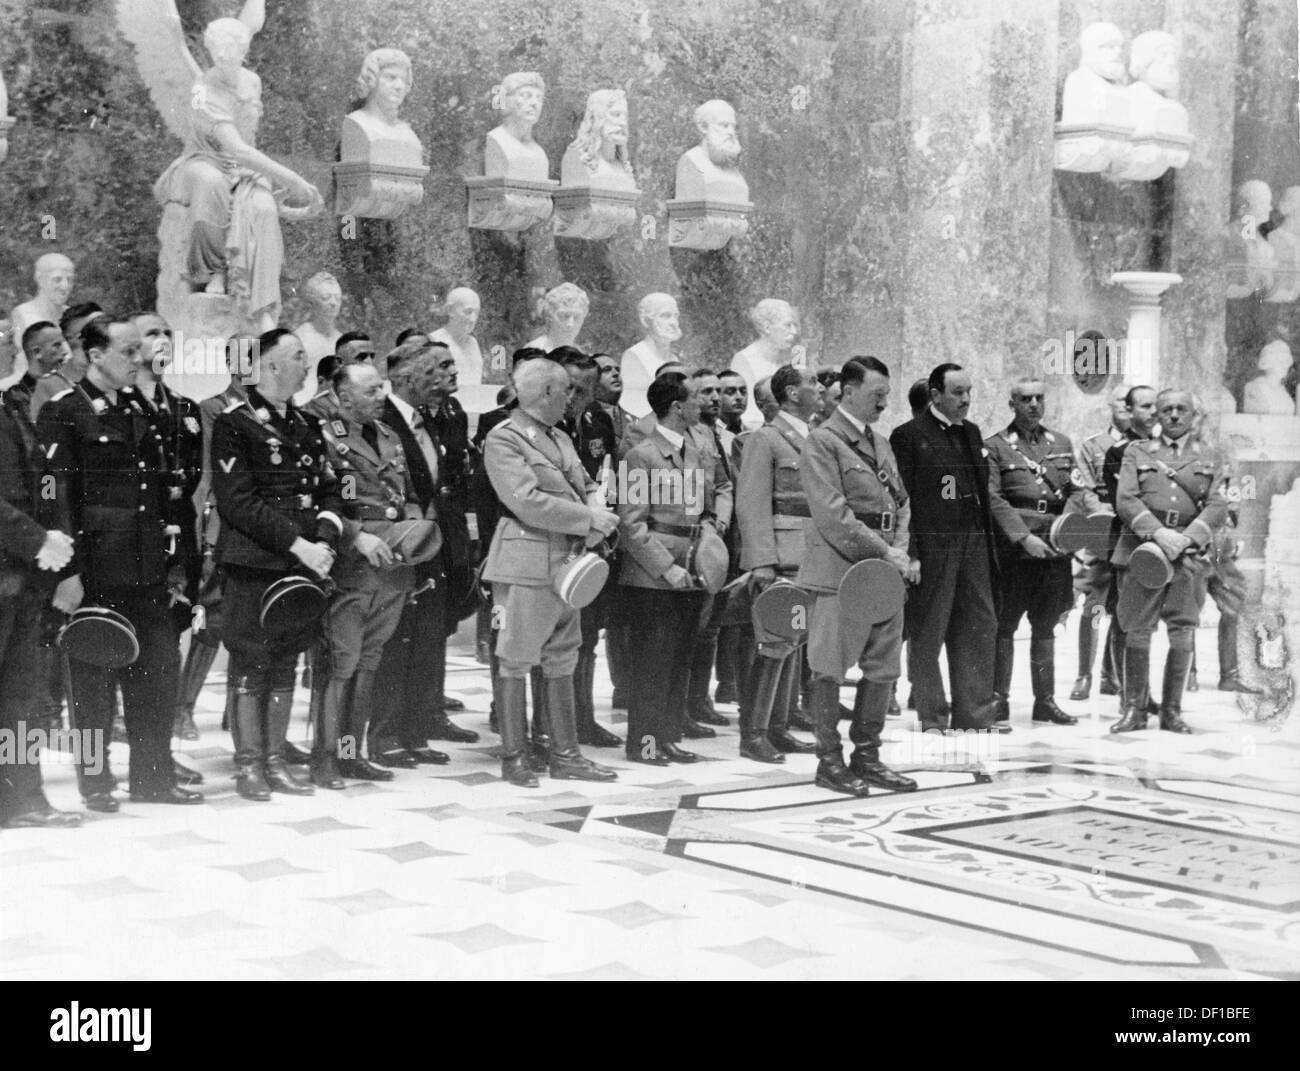 The image from the Nazi Propaganda! shows Hitler on the occasion of the unveiling of the bust for the "German naturalized" Austrian composer Anton Bruckner in the Walhalla in Regensburg, Germany, 6 June 1937. Front row l-r: Reich Minister Franz Gürtner (left margin), Reich Minister Walther Darré, Reichsführer SS Heinrich Himmler, unknown, the ambassador of the German Reich in Vienna Franz von Papen, Bavarian Premier Ludwig Siebert (in conversation), Joseph Goebbels, Franz Ritter von Epp, Hitler, Austrian ambassador in Germany Stephan Tauschitz (in white tie). Fotoarchiv für Zeitgeschichte Stock Photo